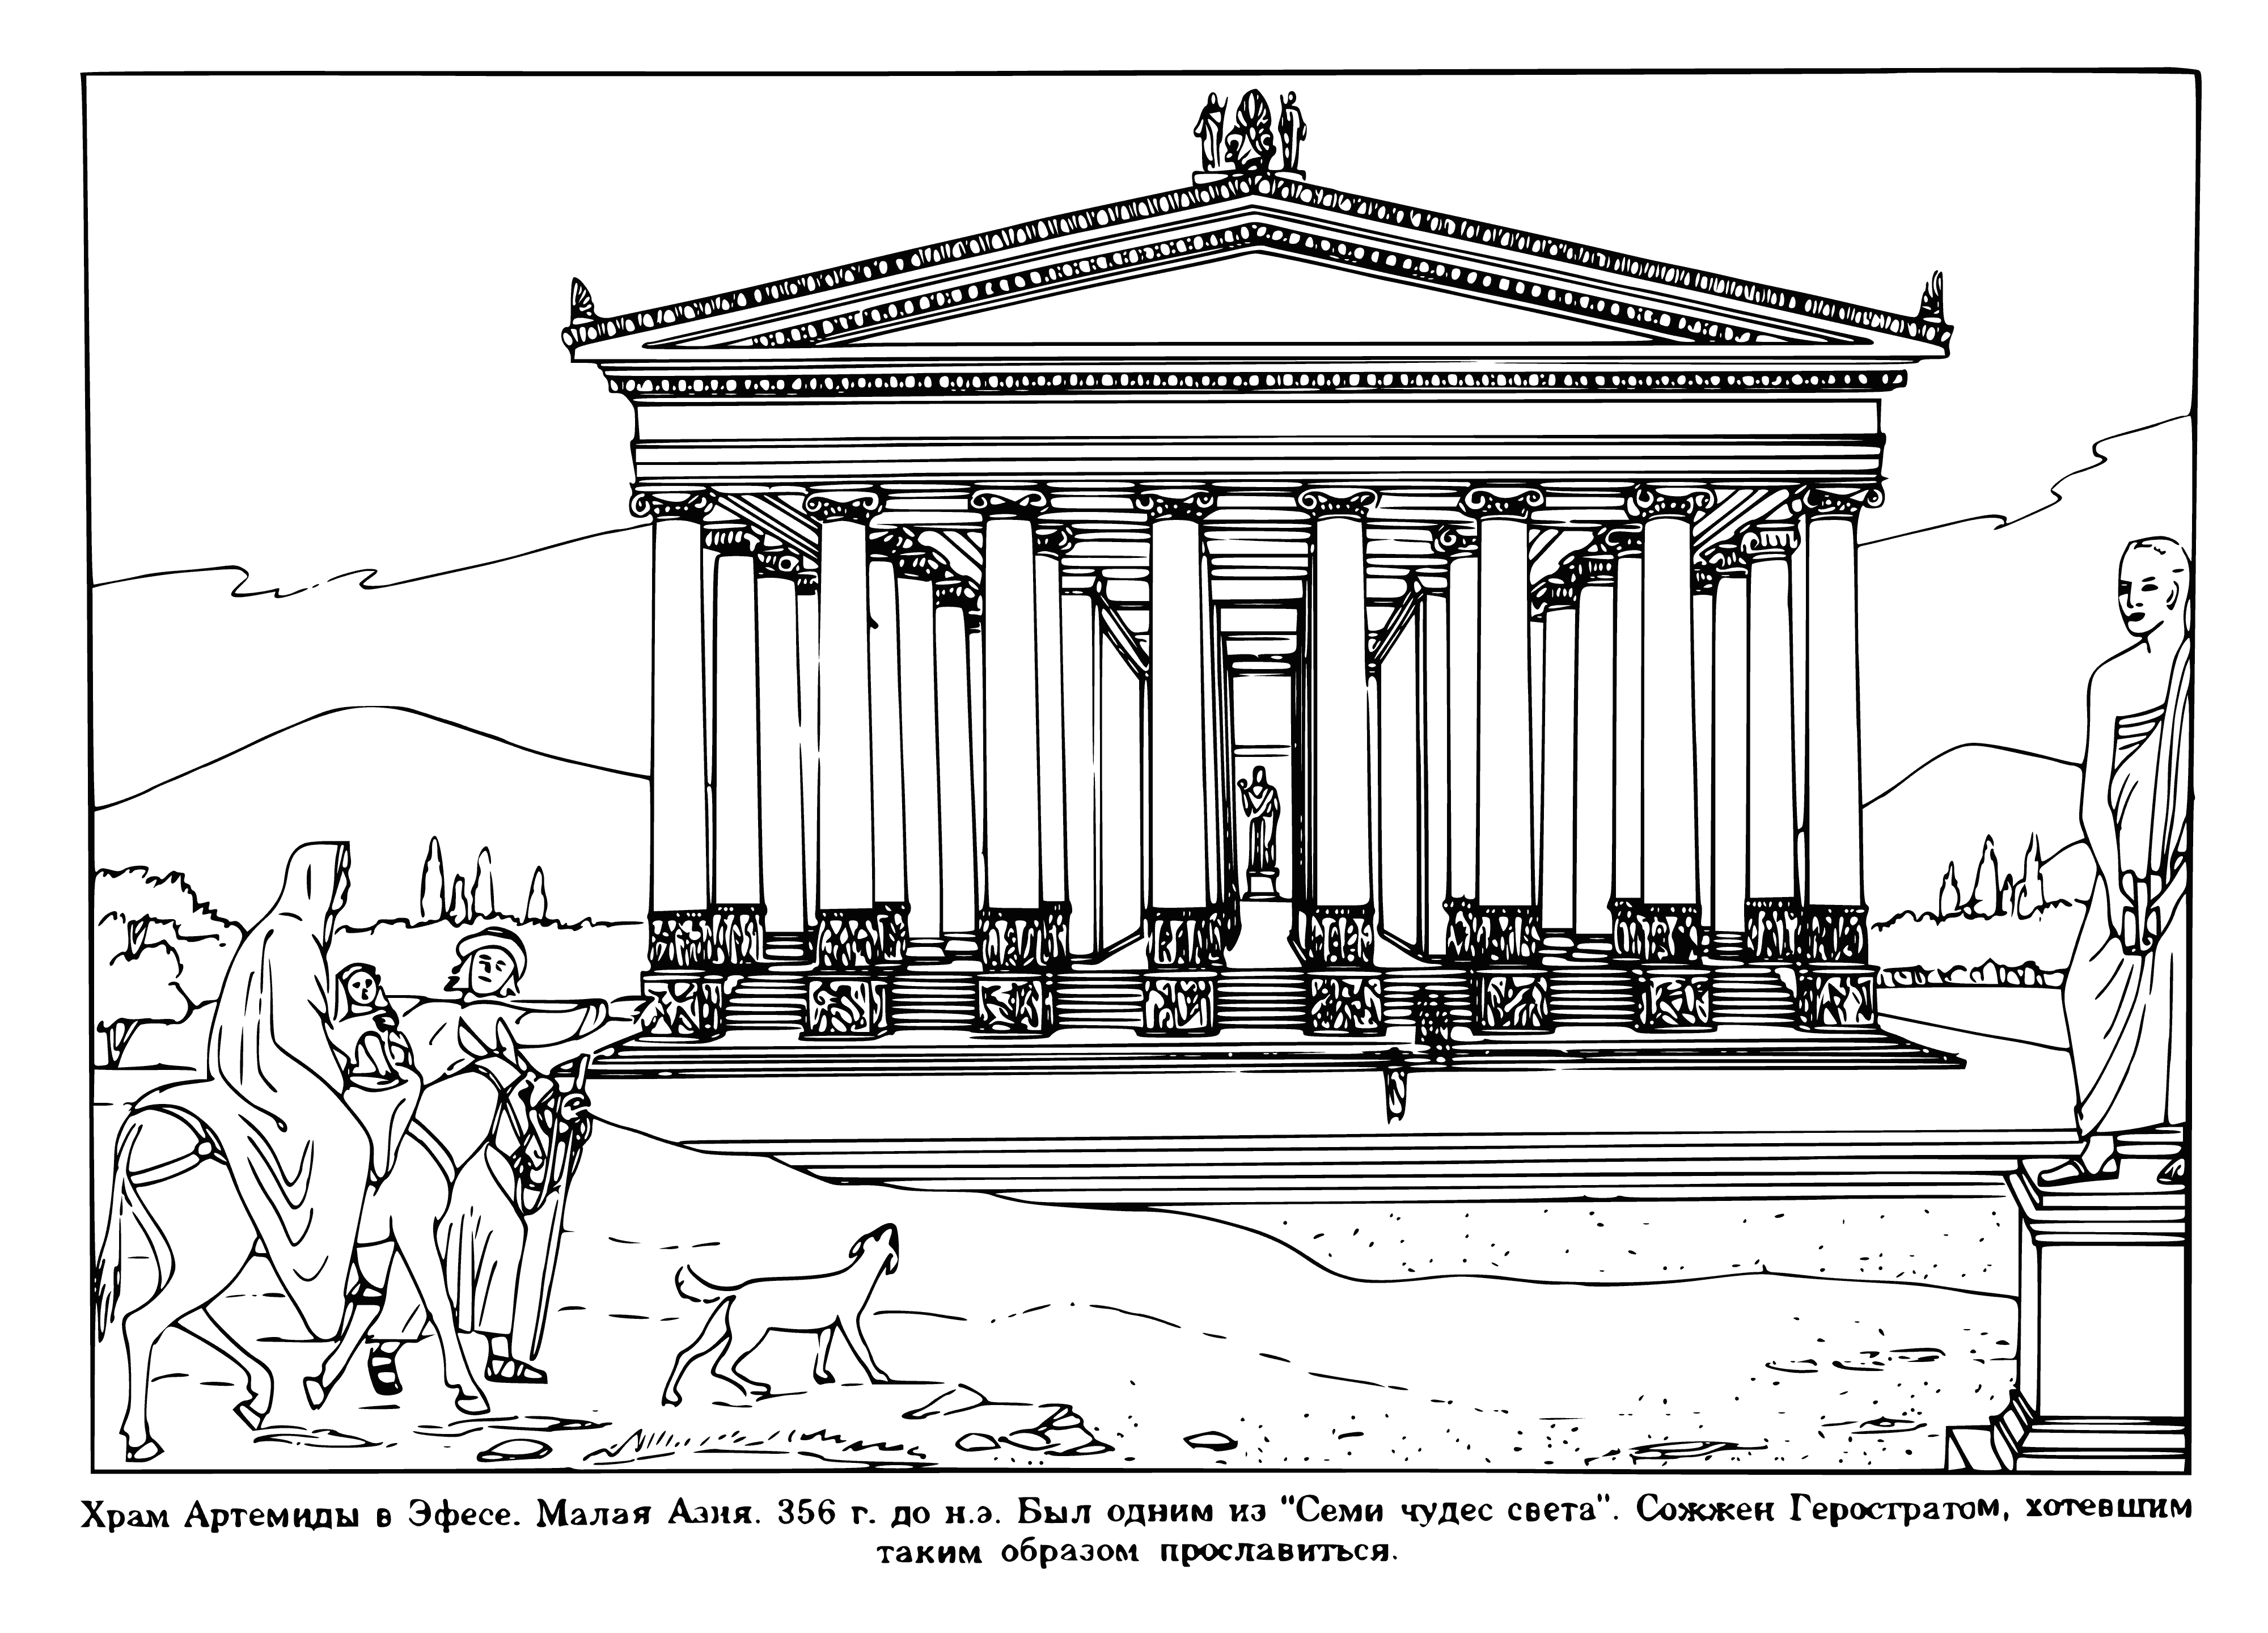 coloring page: Goddess of Ephesus, a marble woman w/lion head, was worshipped in famous temple-complex of ancient world, wearing a jewel-encrusted crown and wooden scepter.